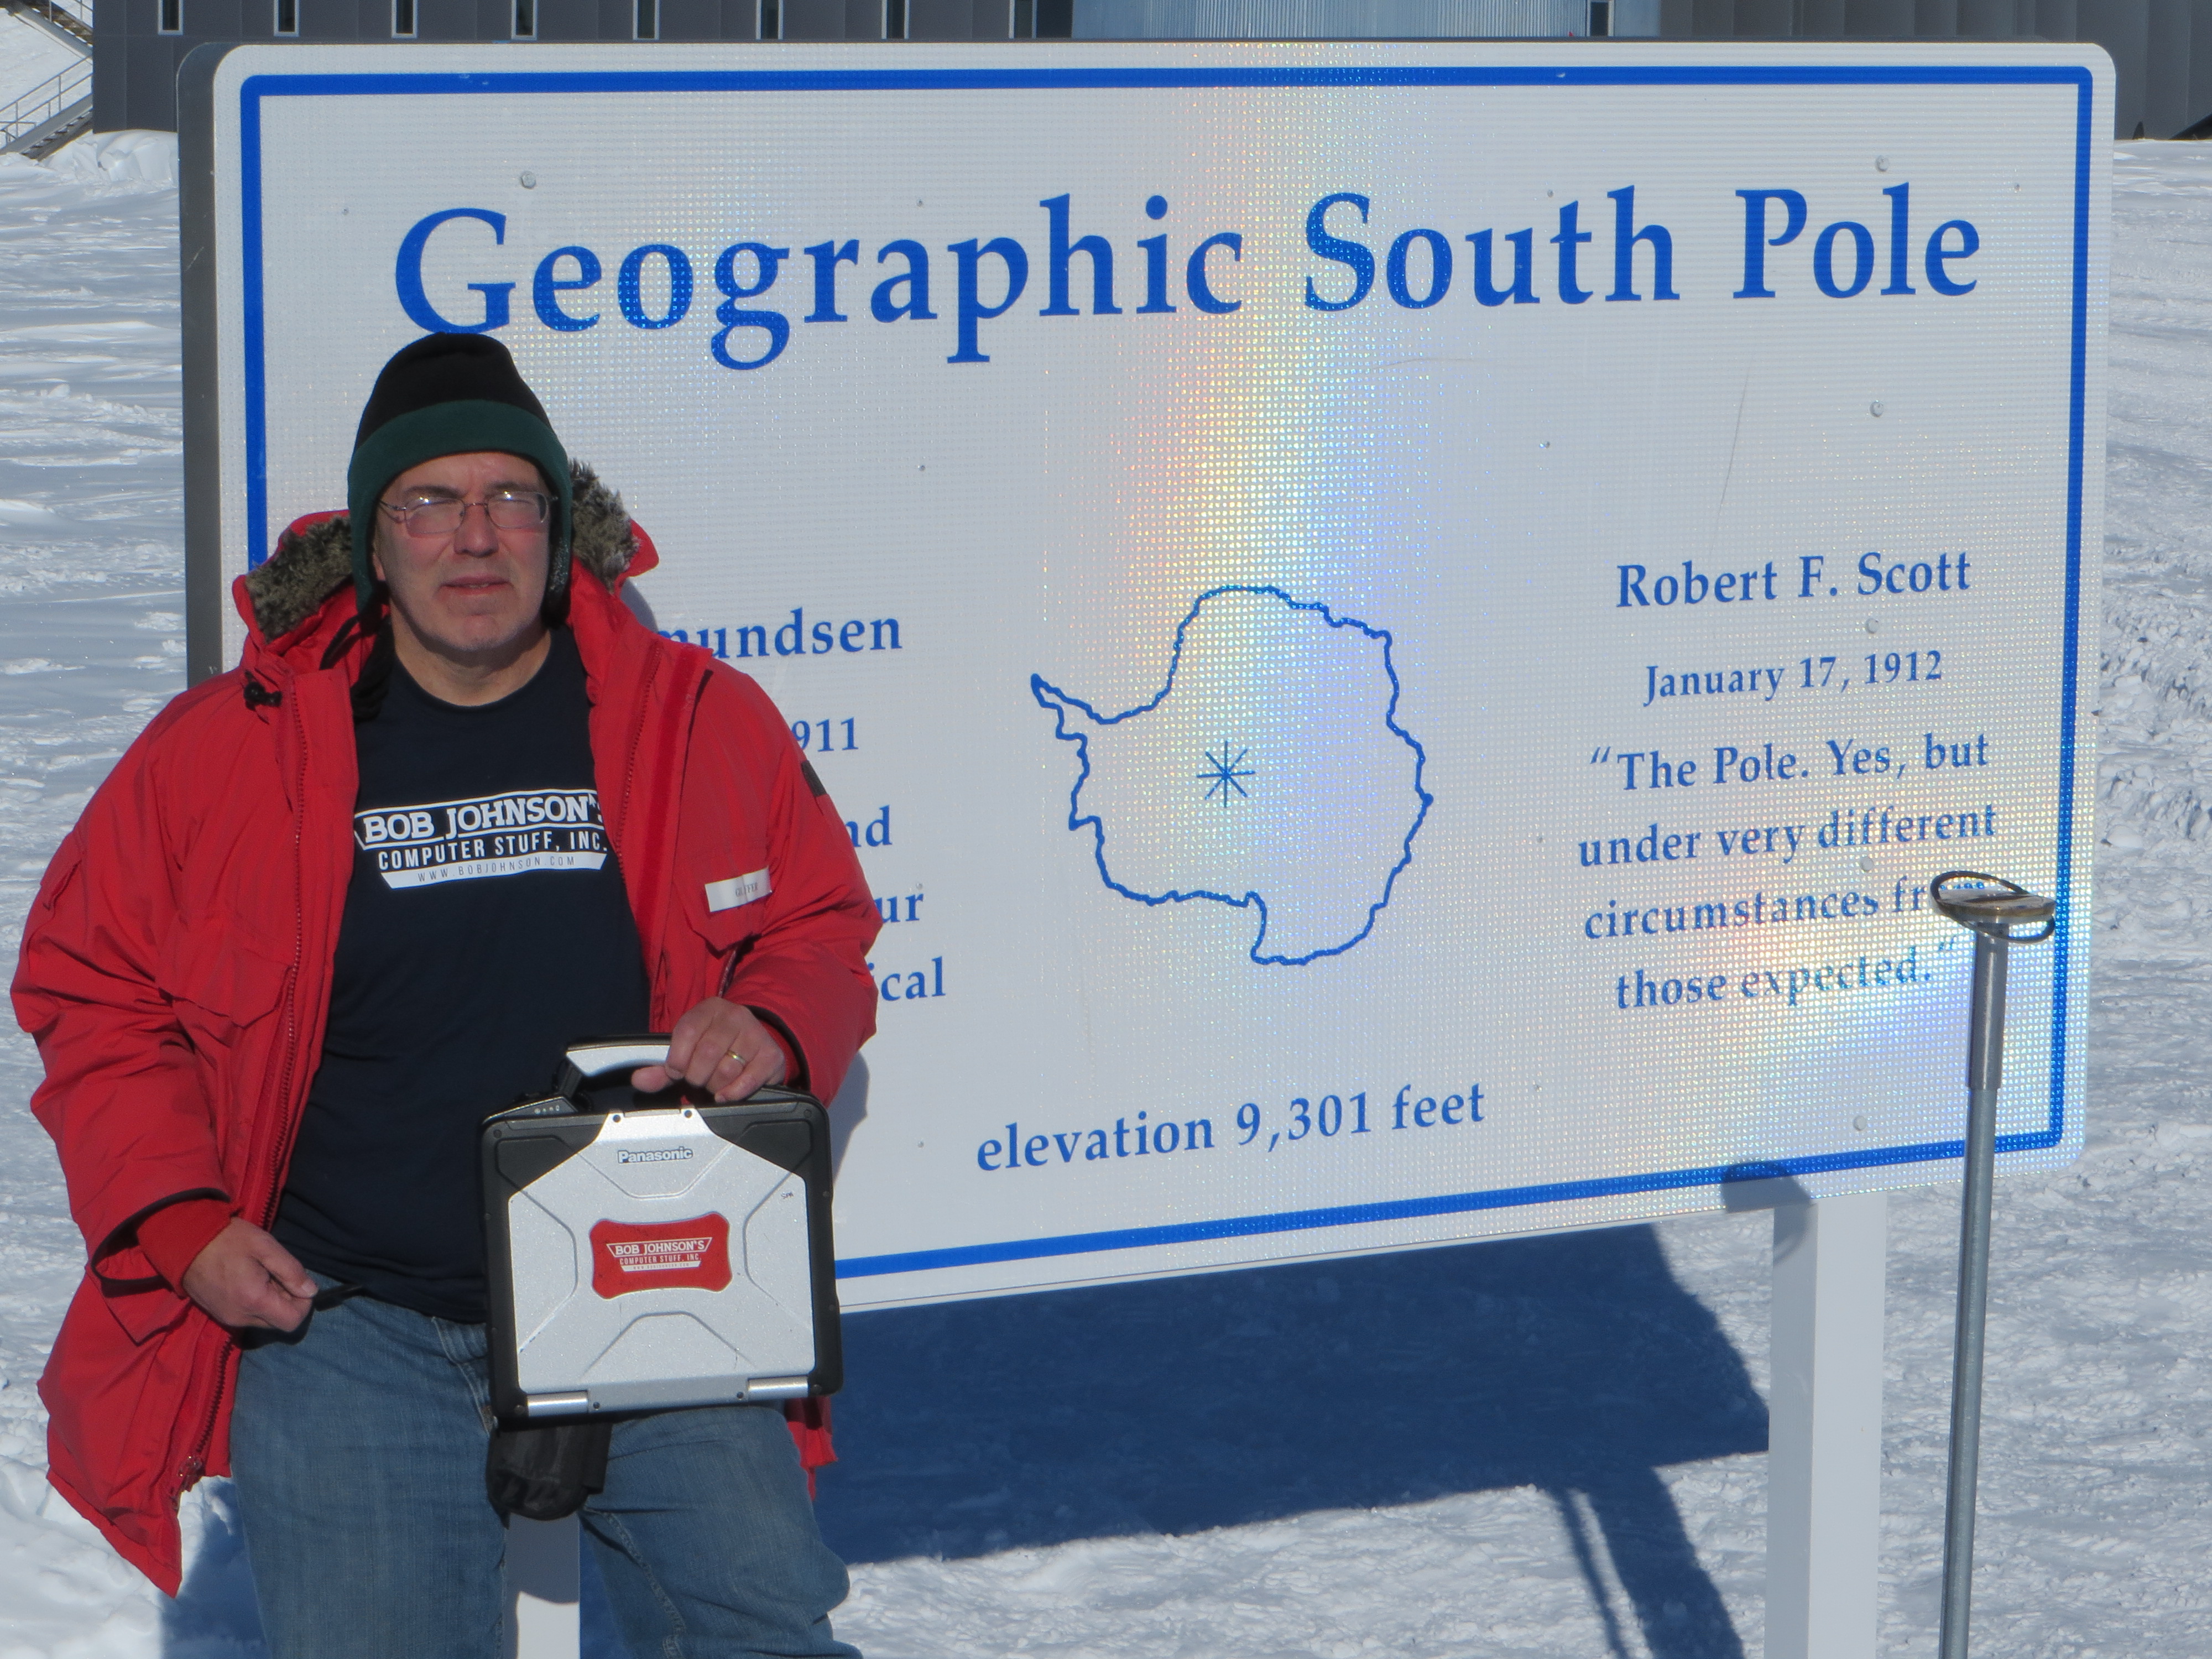 Gil Jeffer at the South Pole with his Toughbook from bobjohnson.com